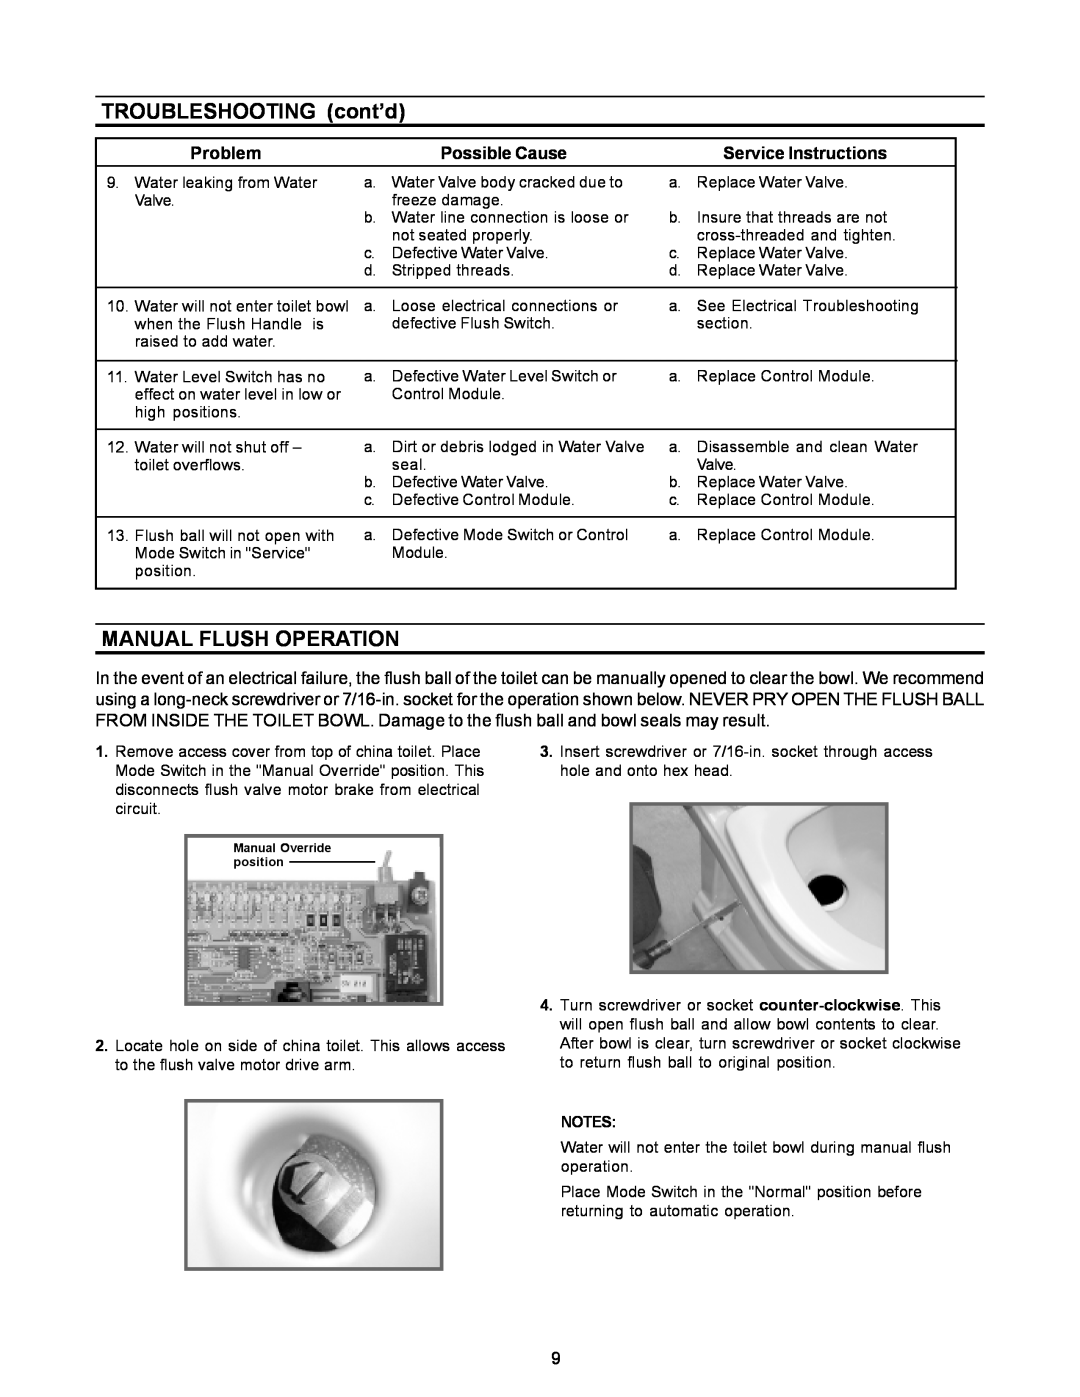 Dometic 3000 Series owner manual TROUBLESHOOTING cont’d, Manual Flush Operation 